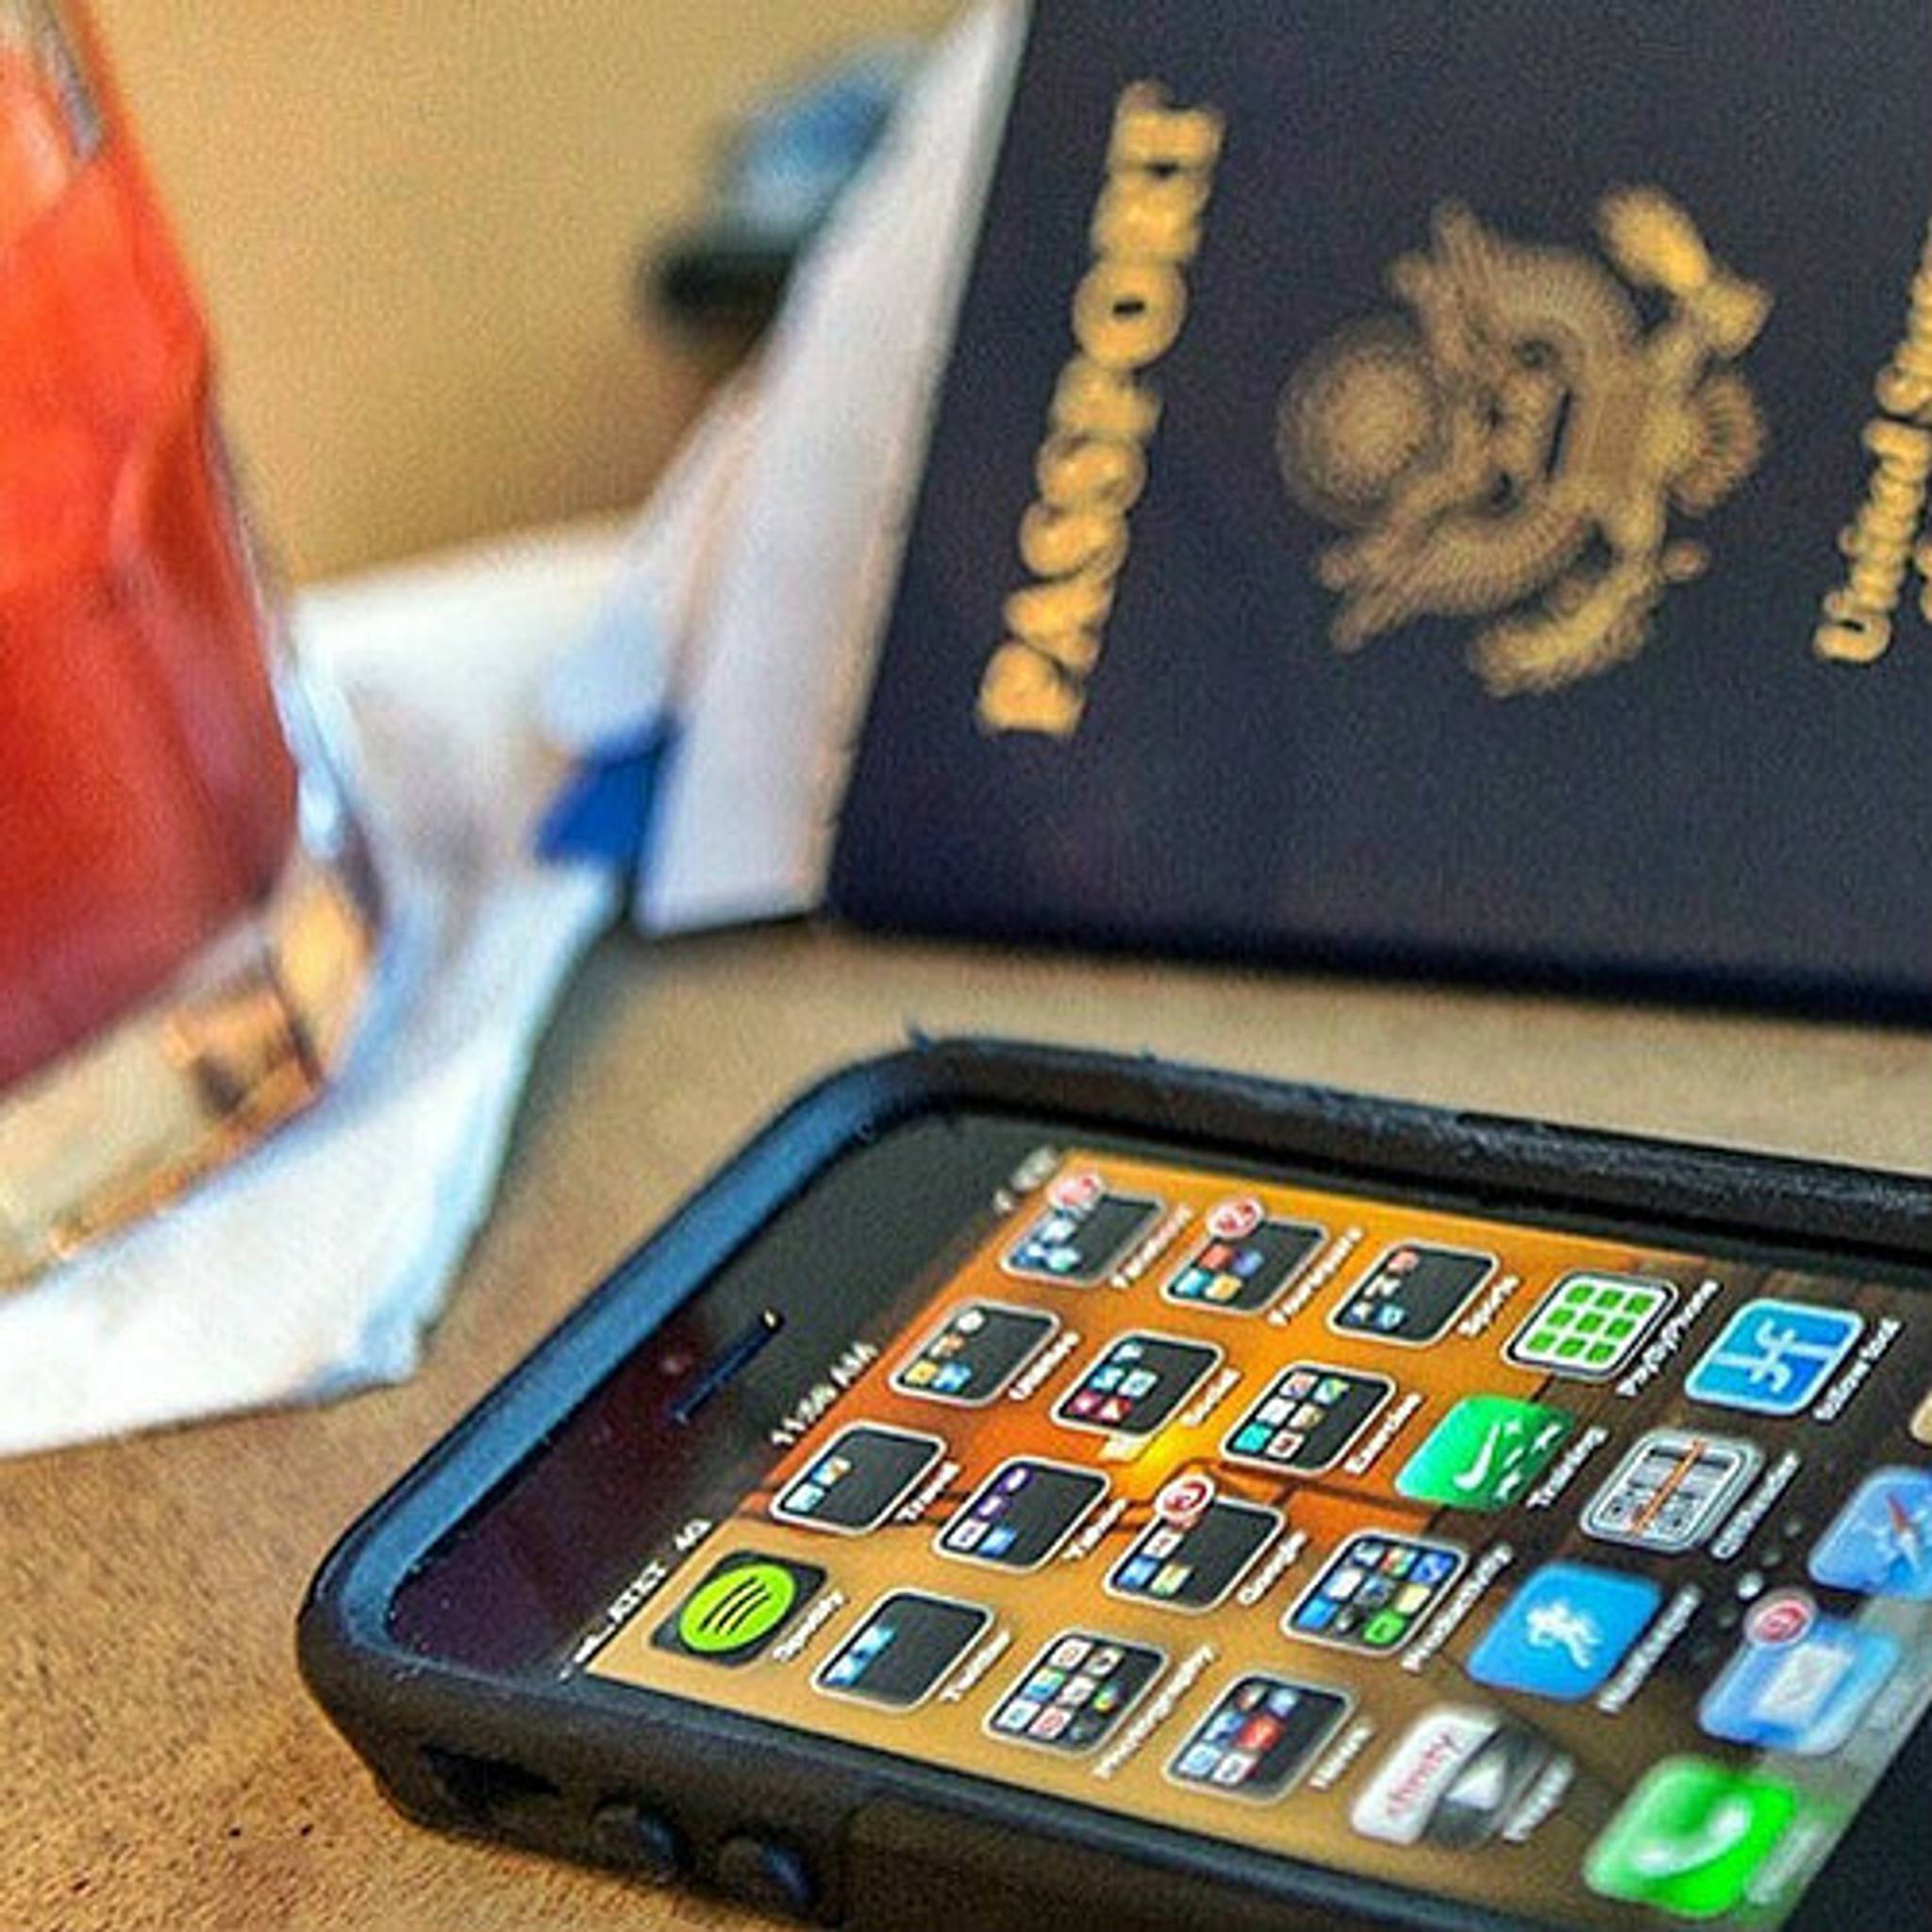 Passports could one day be contained in apps